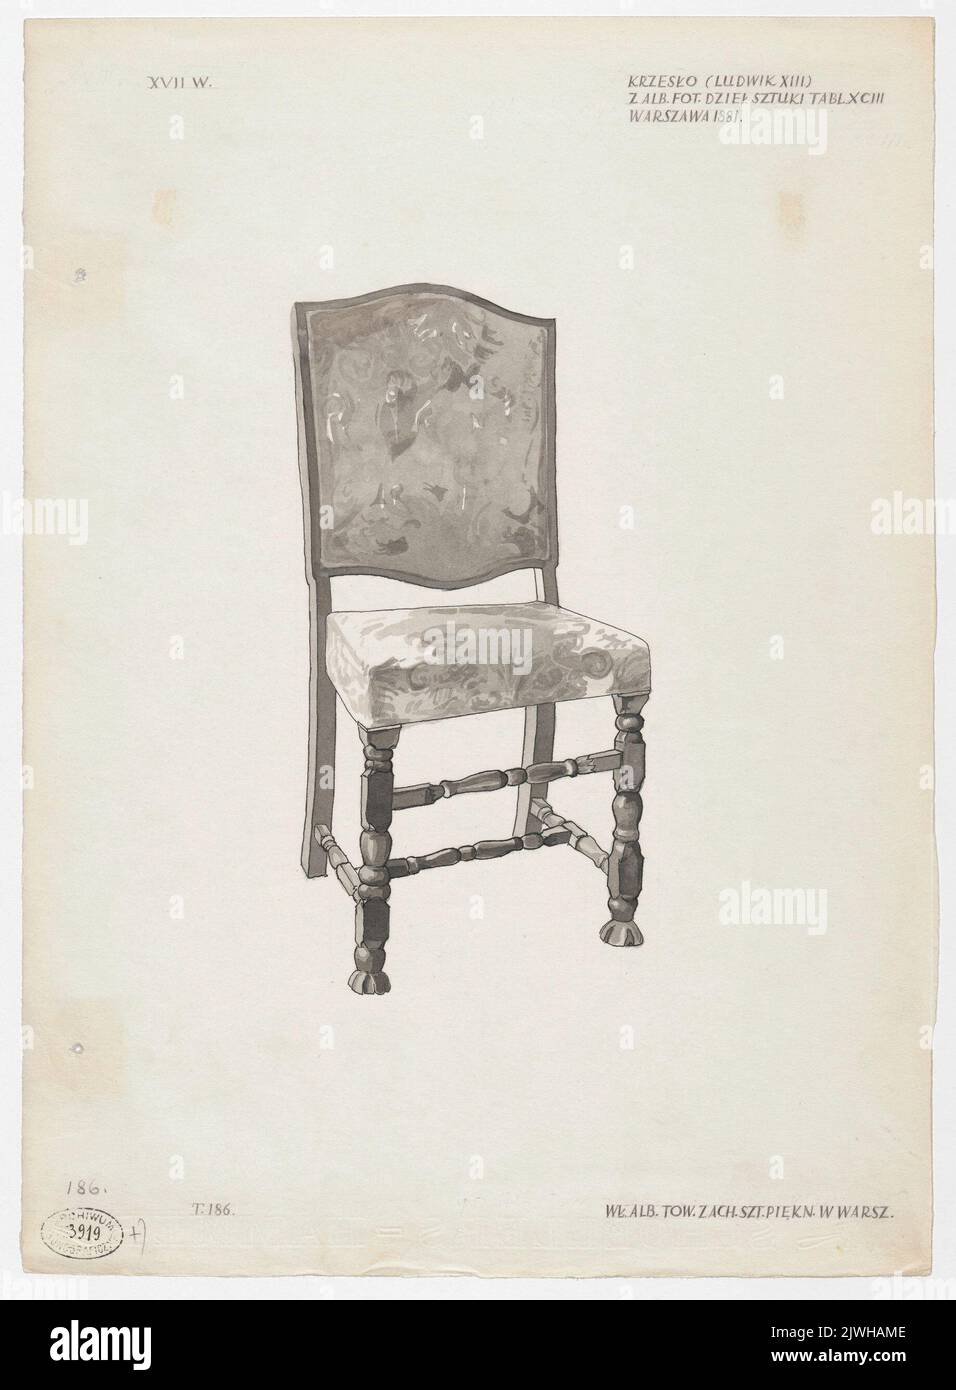 Chair in the style of Louis XIII, according to photograph from the 'Album of industrial works of art from the exhibit of the Museum of Industry and Agriculture in Warsaw 1881', table XCIII; album from the collection of the Zachęta Arts Society in Warsaw. Frankiewicz (Francewicz), Władysław (fl. 1915), draughtsman, cartoonist Stock Photo